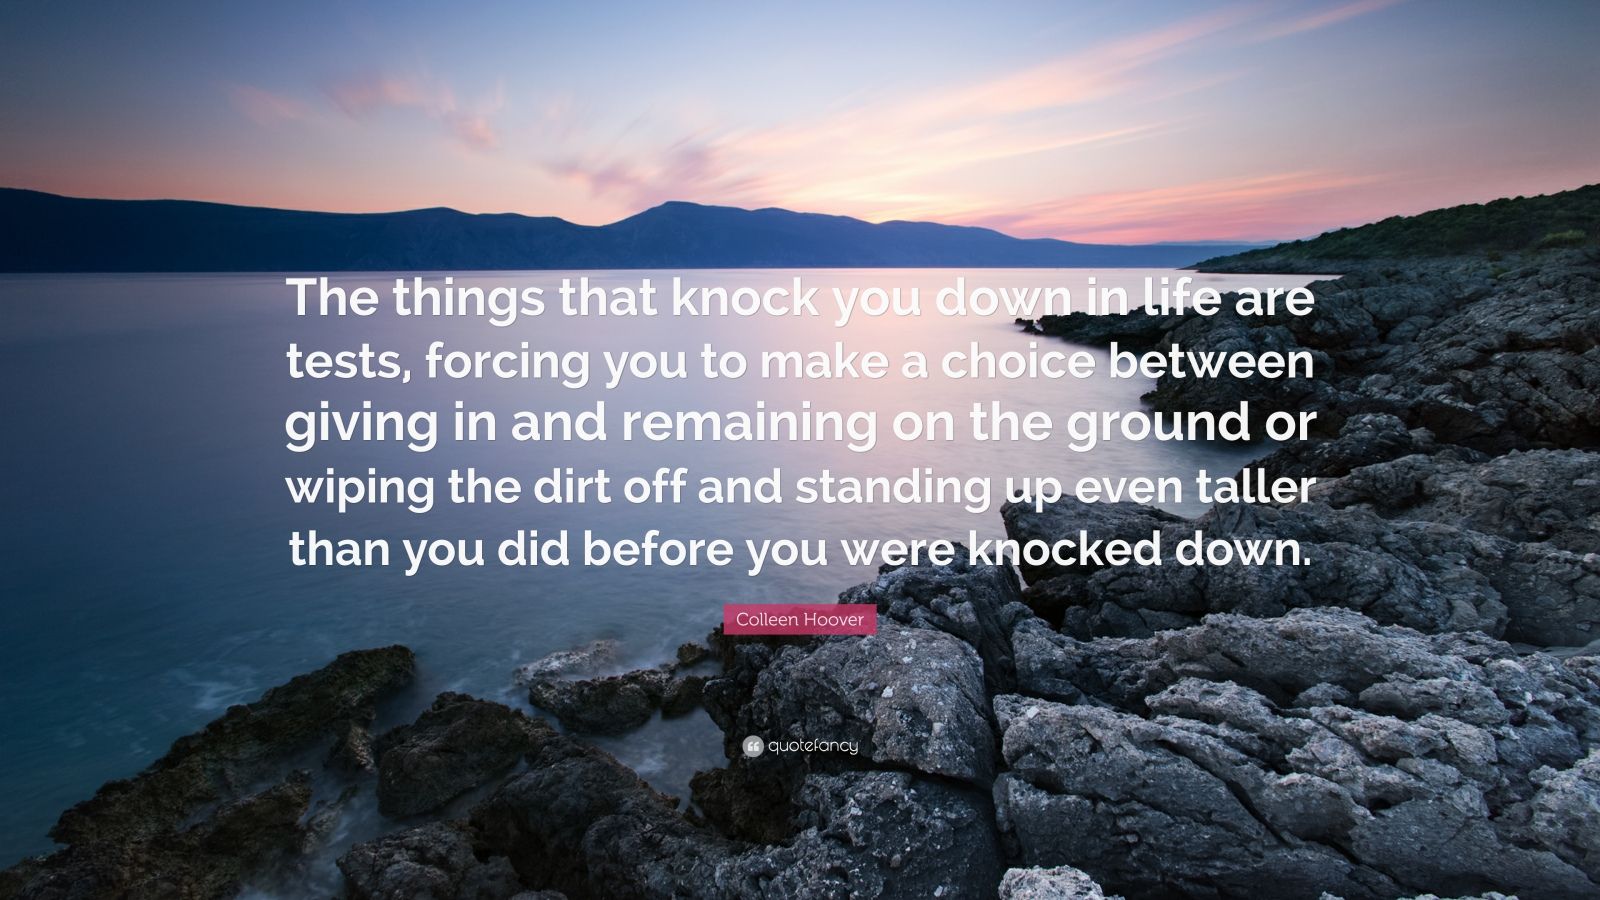 Colleen Hoover Quote “The things that knock you down in life are tests